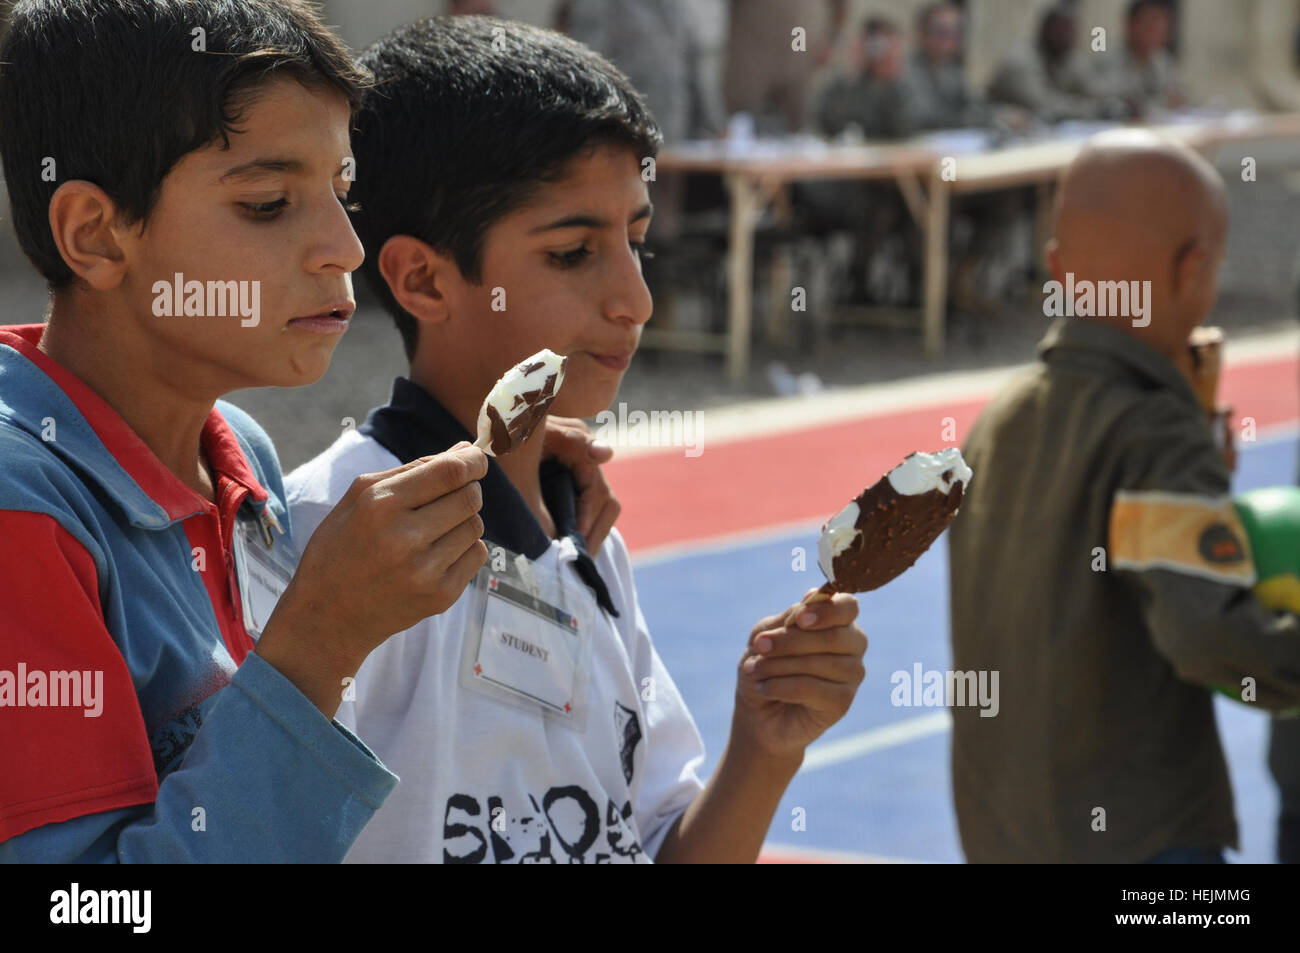 Two Iraqi children eat ice cream at Joint Base Balad, Iraq, Oct. 10, 2009 during a kids' day hosted by the Air Force here. Children were brought on base to learn fire safety, play games and interact with their military mentors. Service members donate time, goods to Iraqis 227214 Stock Photo